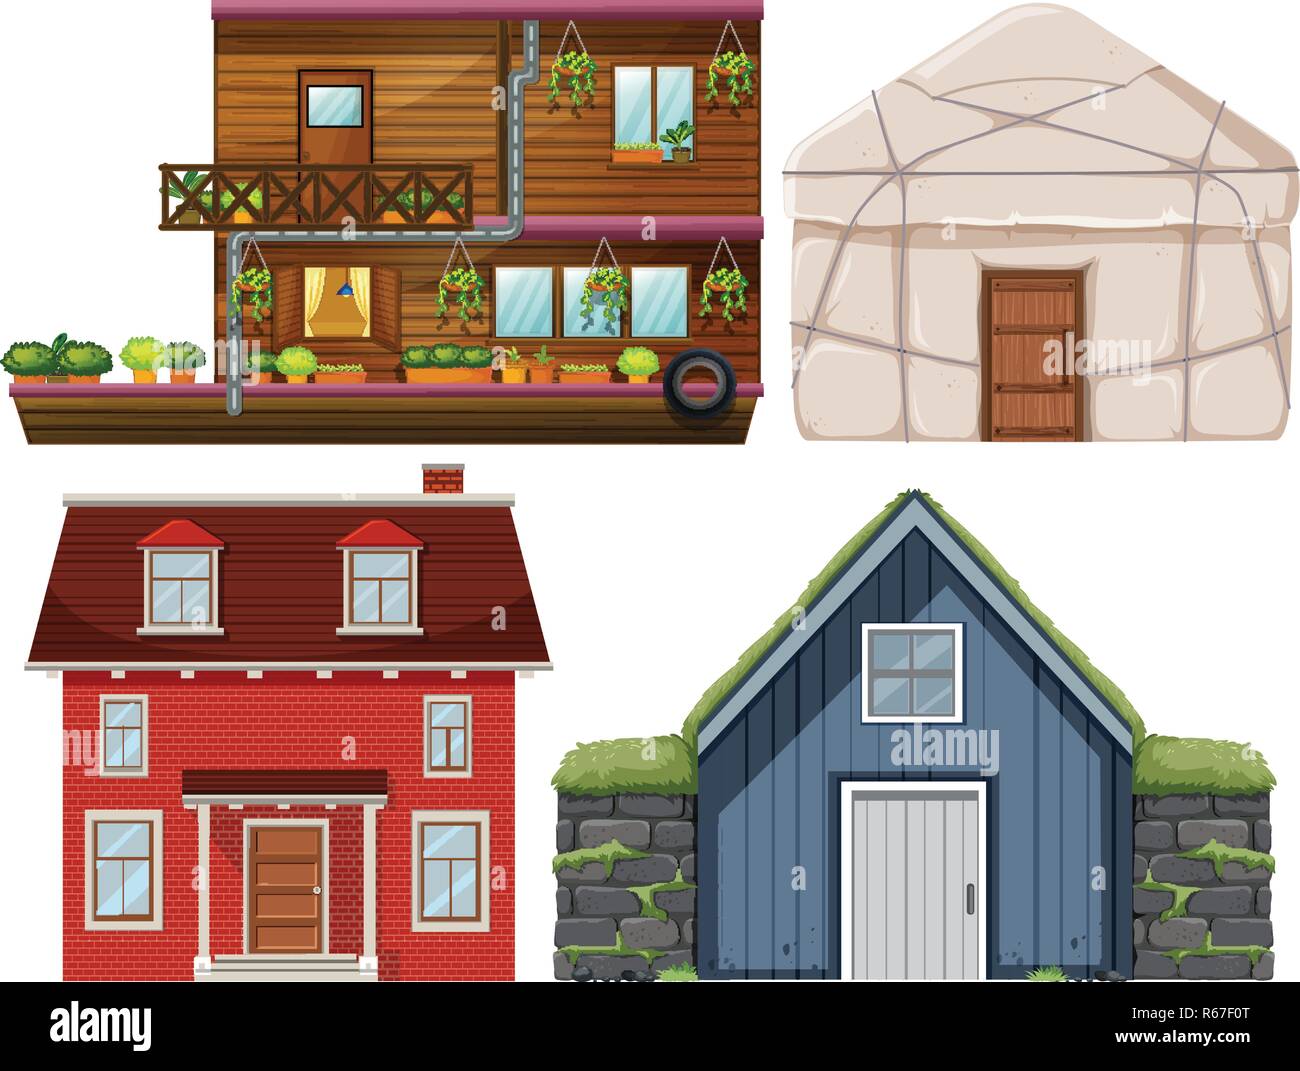 Set of different house illustration Stock Vector